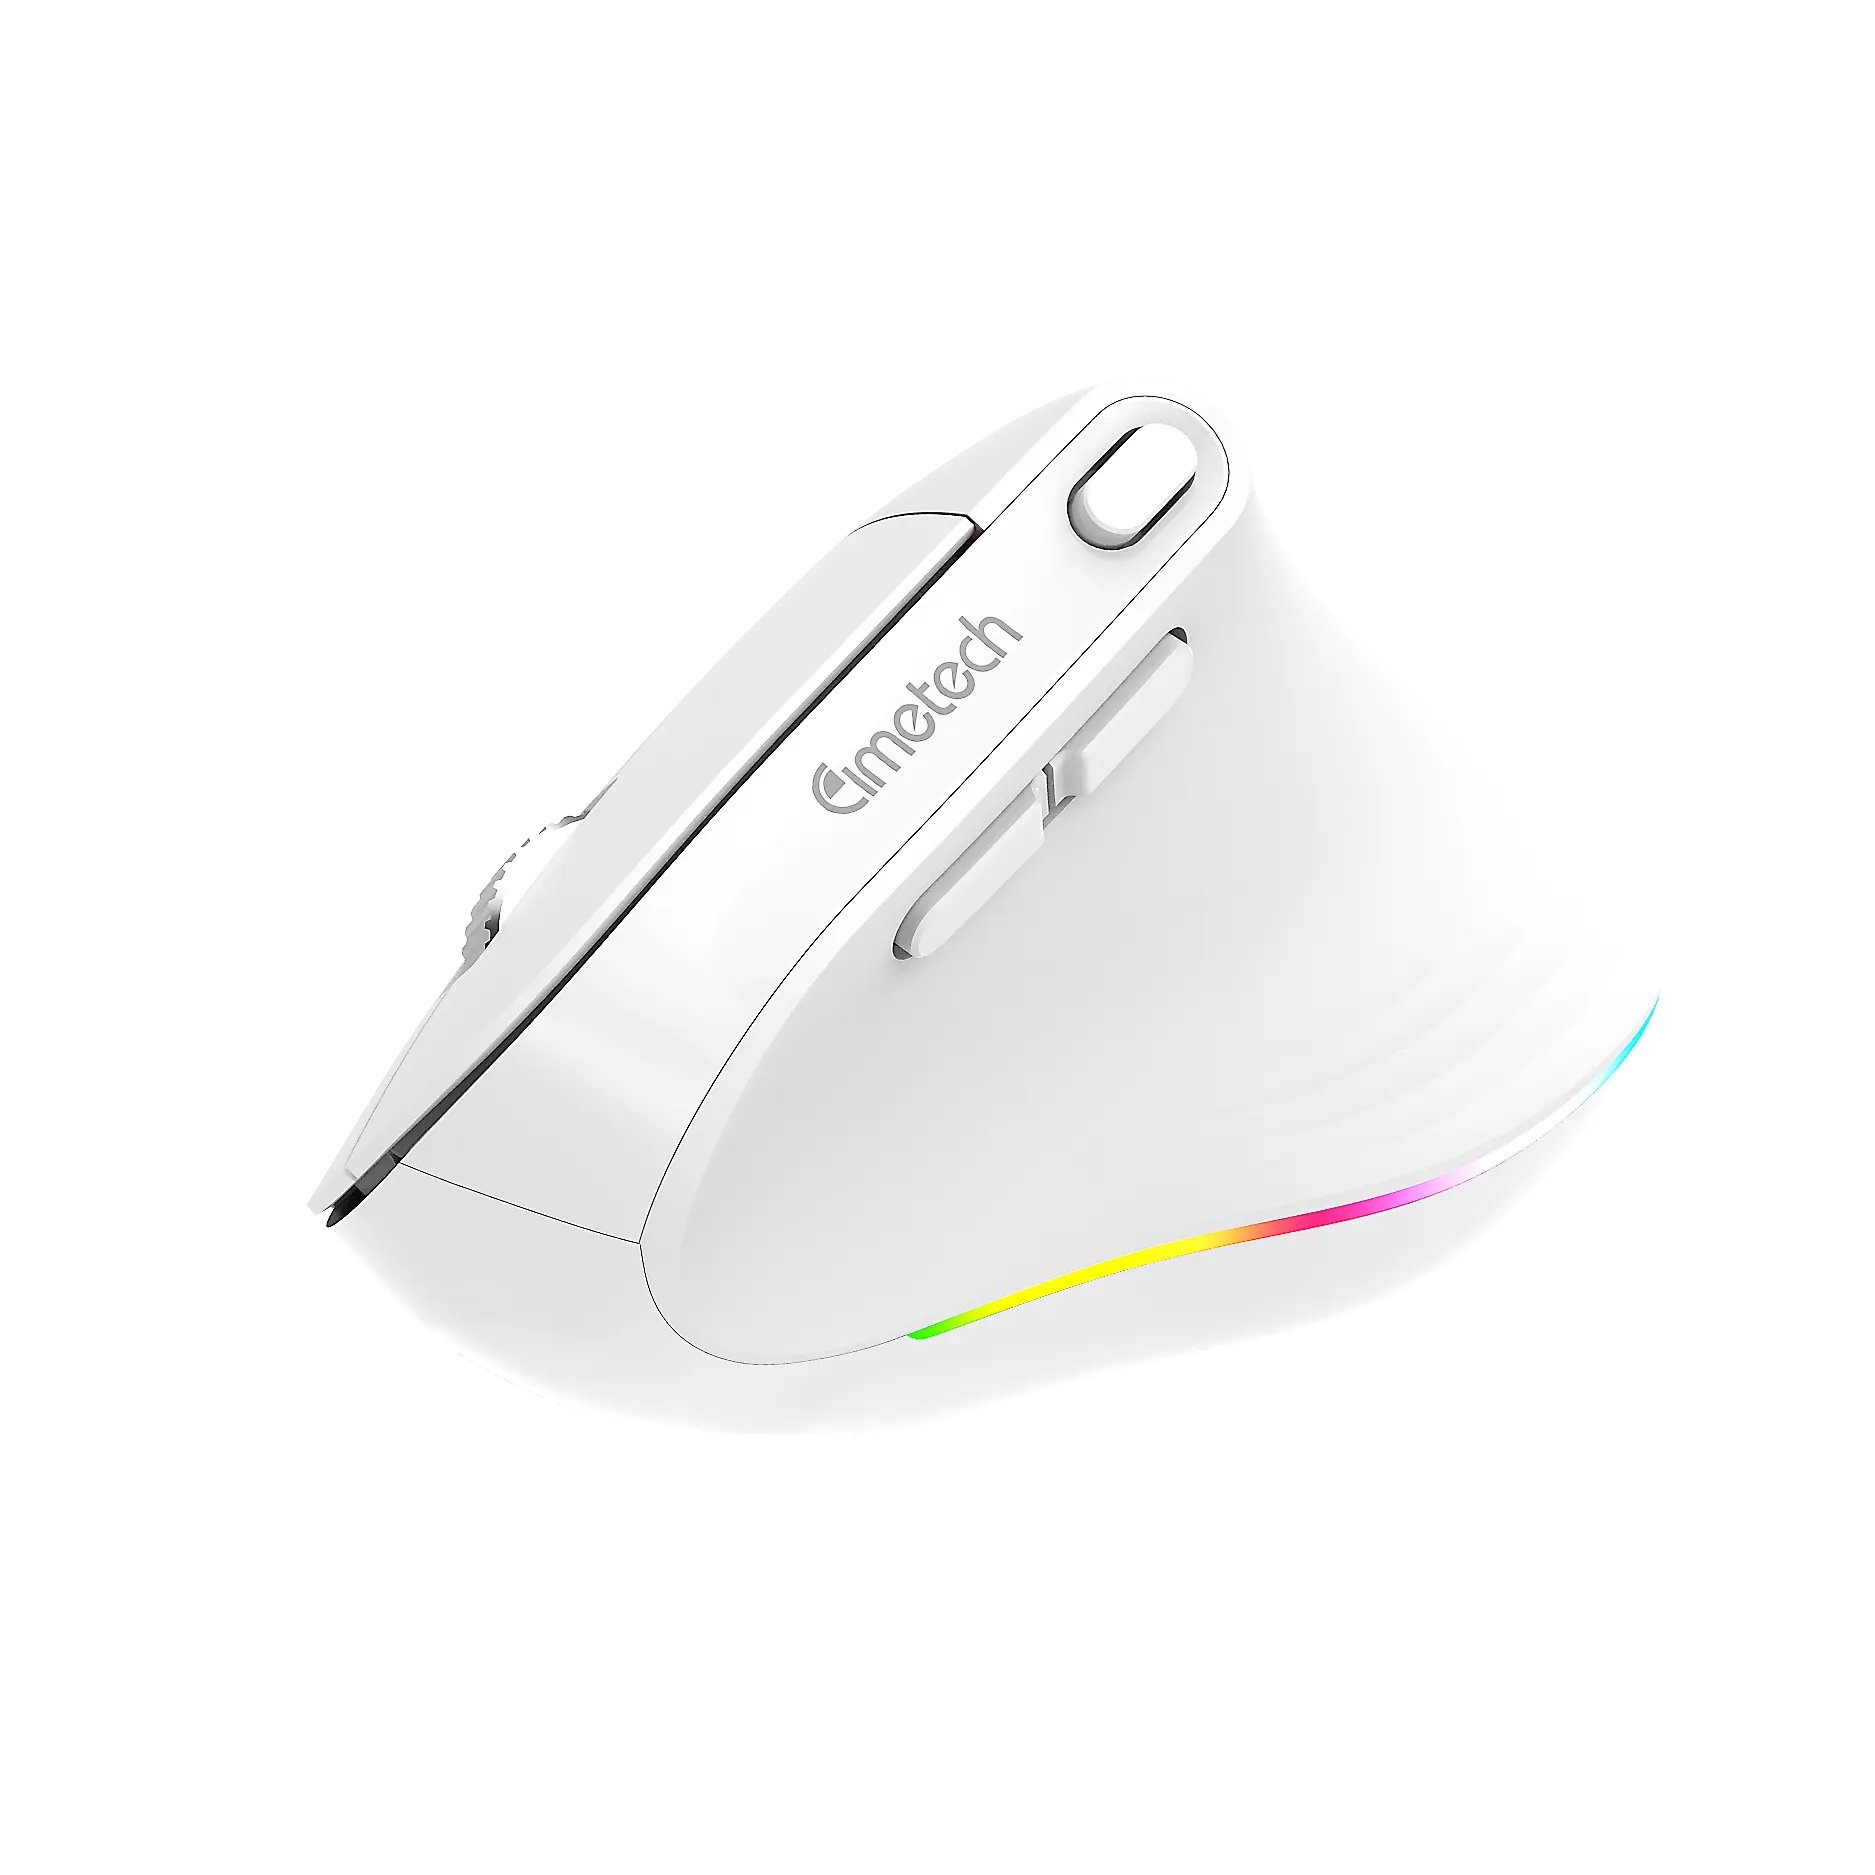 Computer Mice Wireless Ergonomic Vertical Mouse RGB Mouse Optical Pc for PC New Laptop Office Arrival 6d 2.4ghz Gift Box Battery